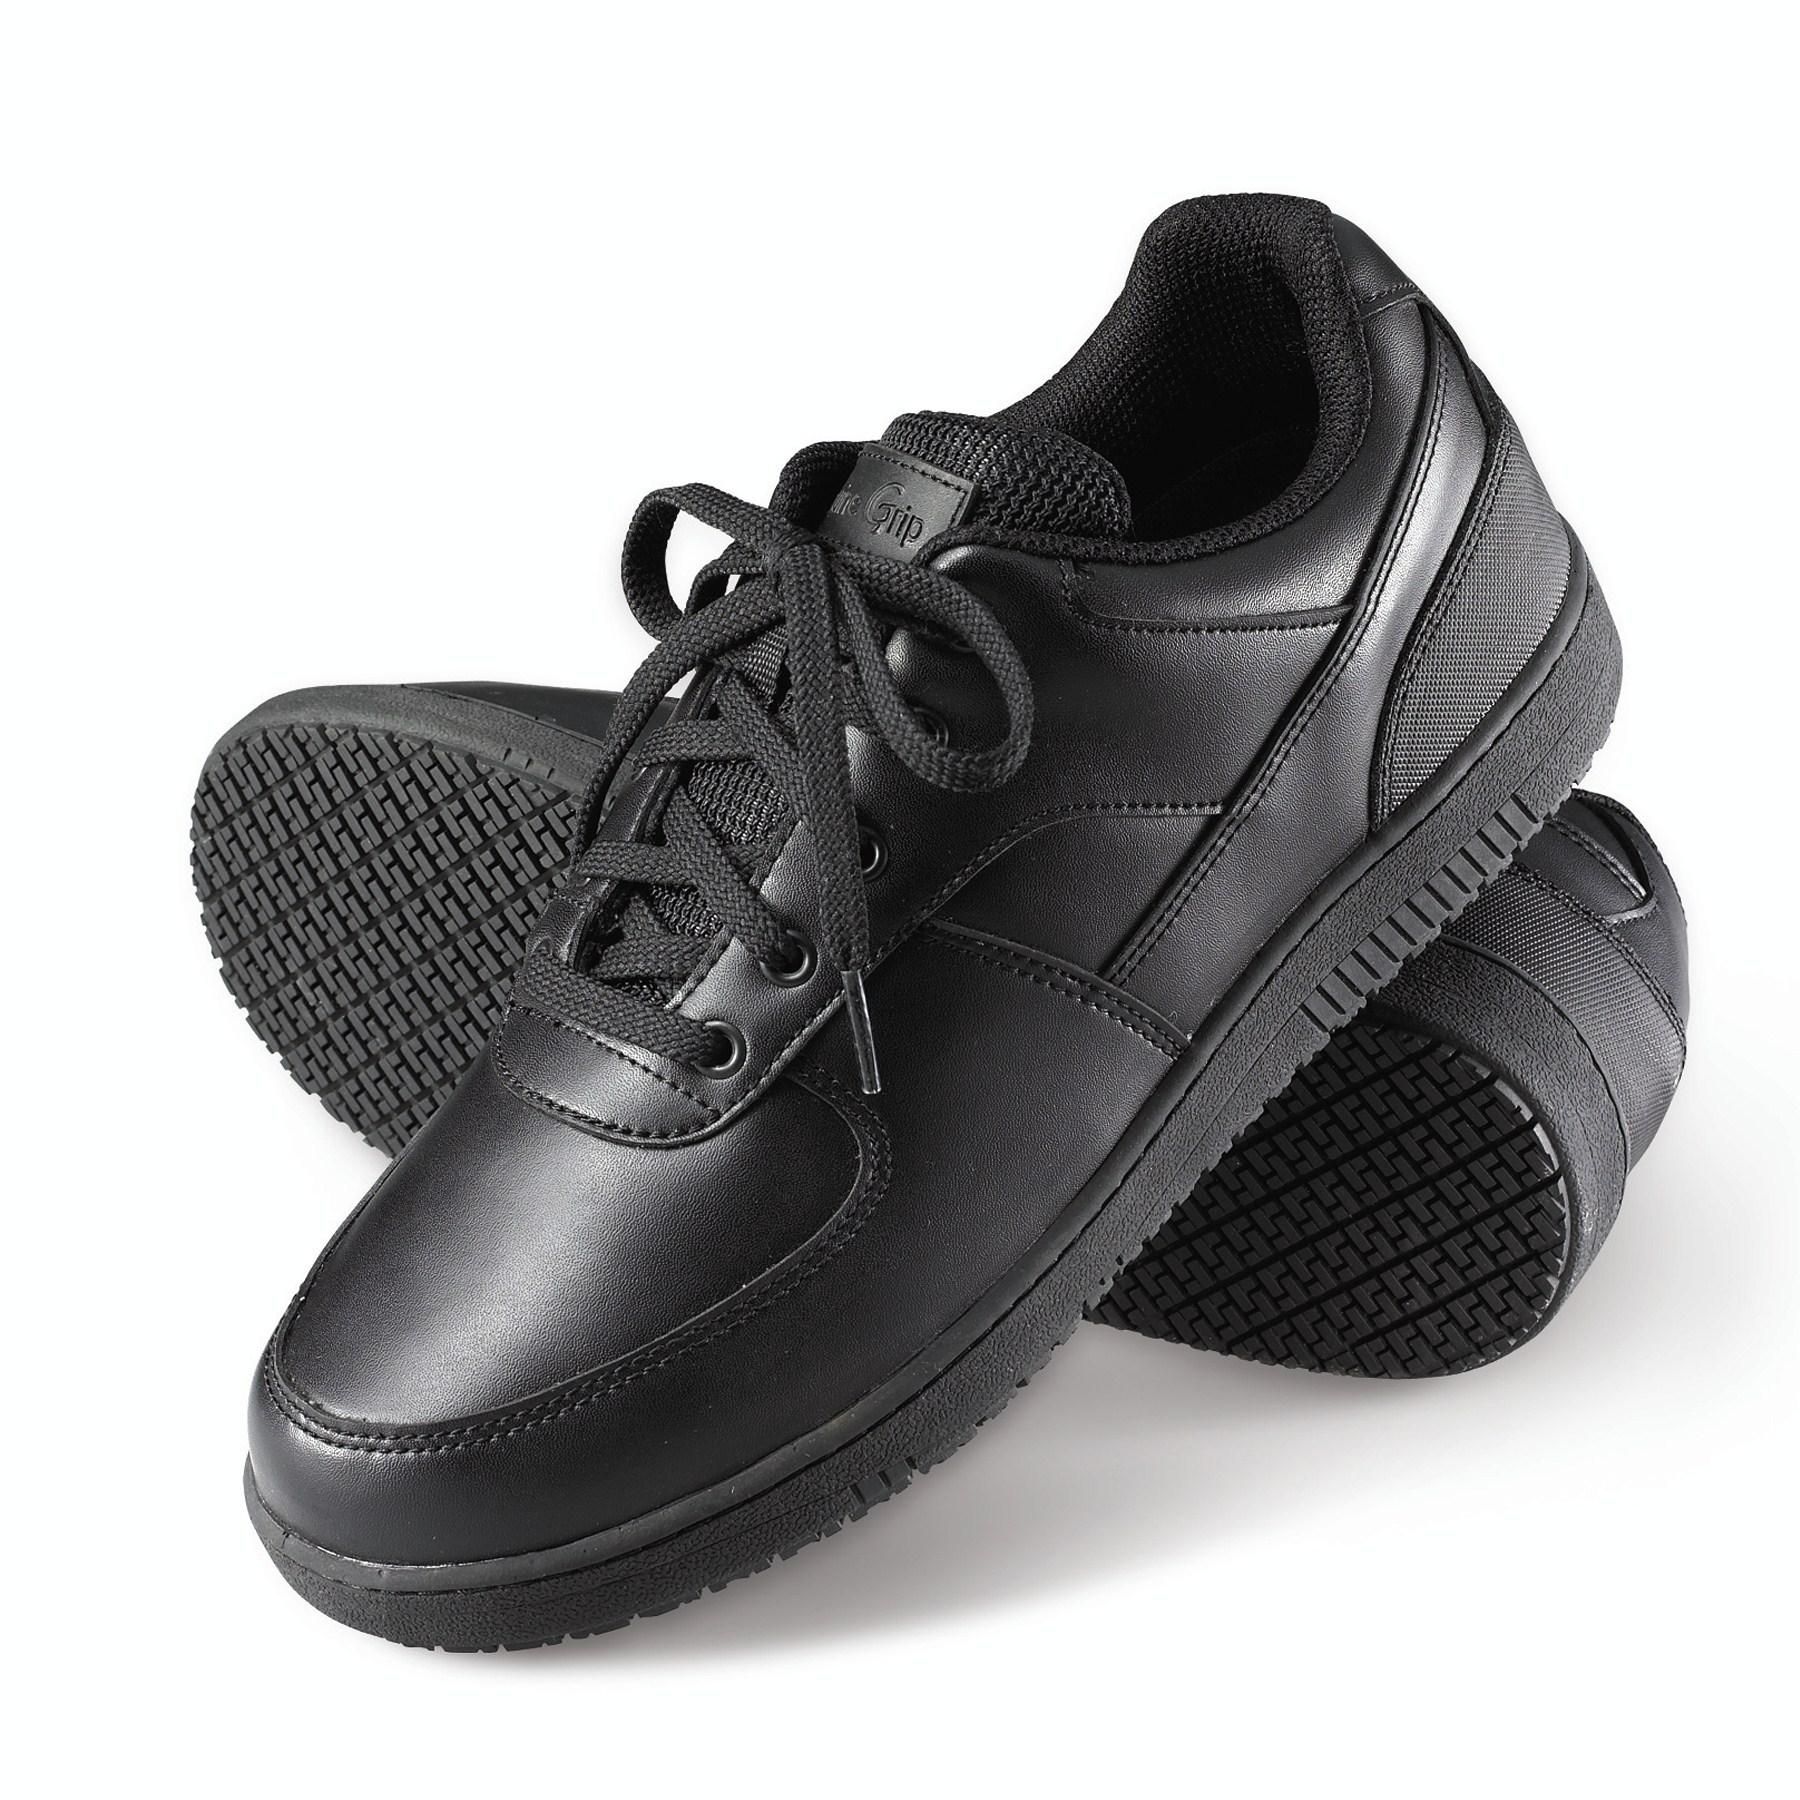 Genuine Grip Men&#39;s Slip-Resistant Athletic Work Shoes #2010 Black - Clothing, Shoes & Jewelry ...